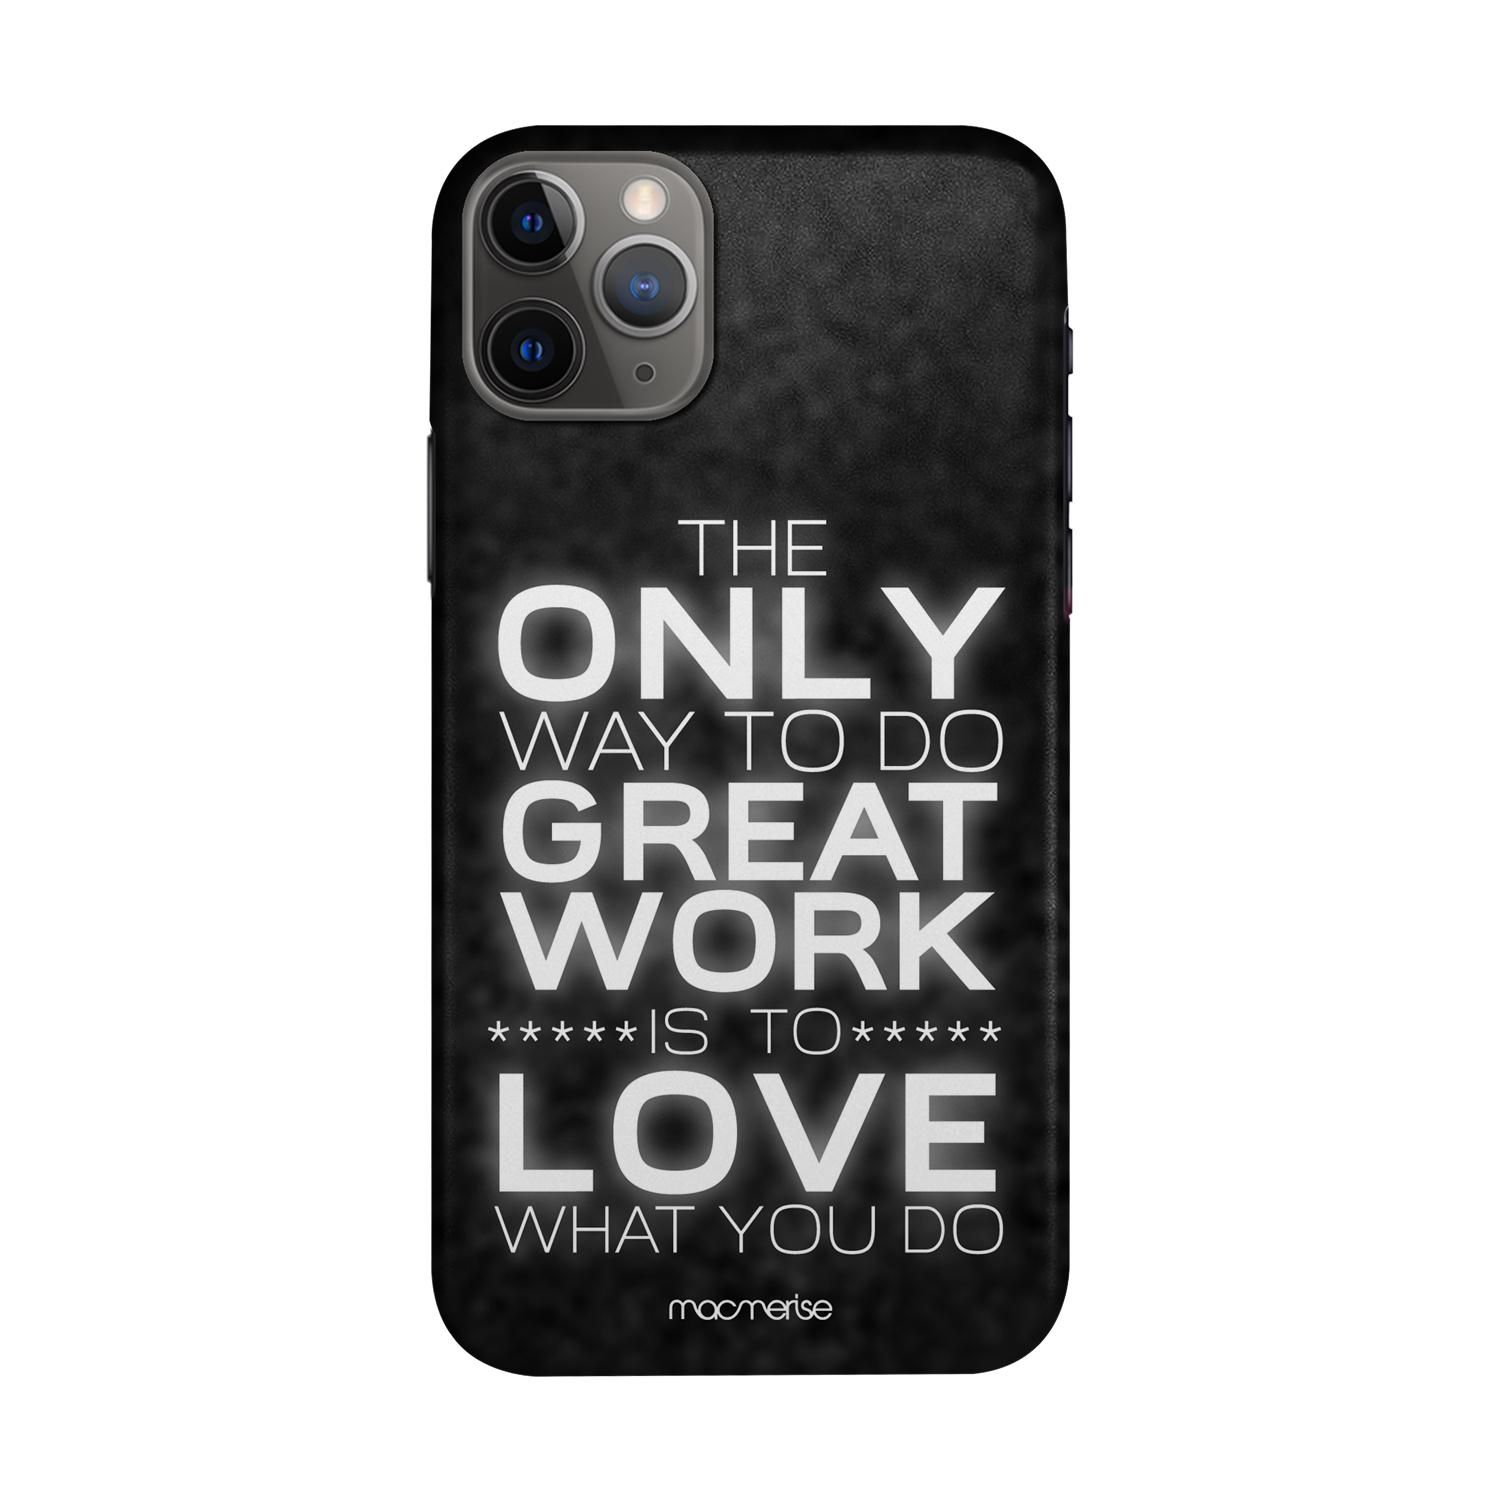 Buy Love What You Do - Sleek Phone Case for iPhone 11 Pro Online